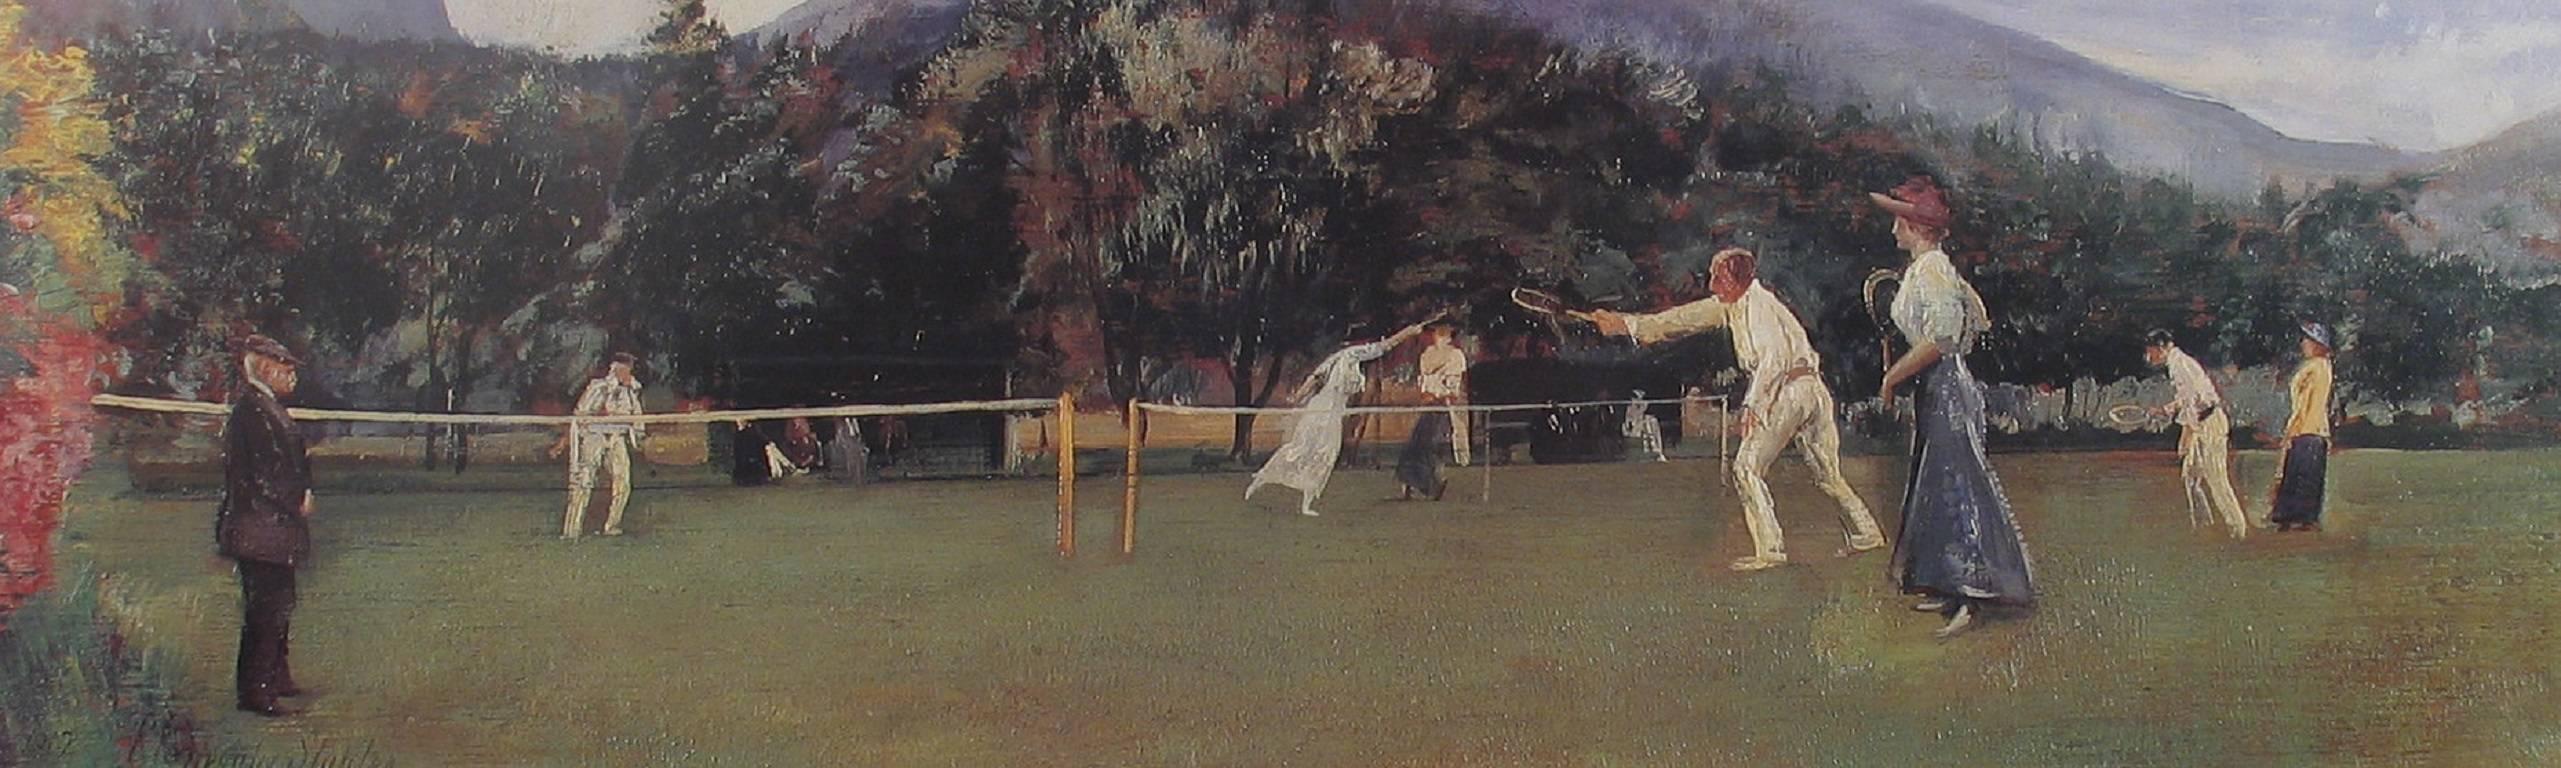 A splendid limited edition tennis print 'LAWN TENNIS' taken from the original oil painting by Sir Robert Ponsonby Staples Bt. (1853-1943). In this scene he portrays vividly the atmosphere and excitement of a game of tennis in its early days.

This